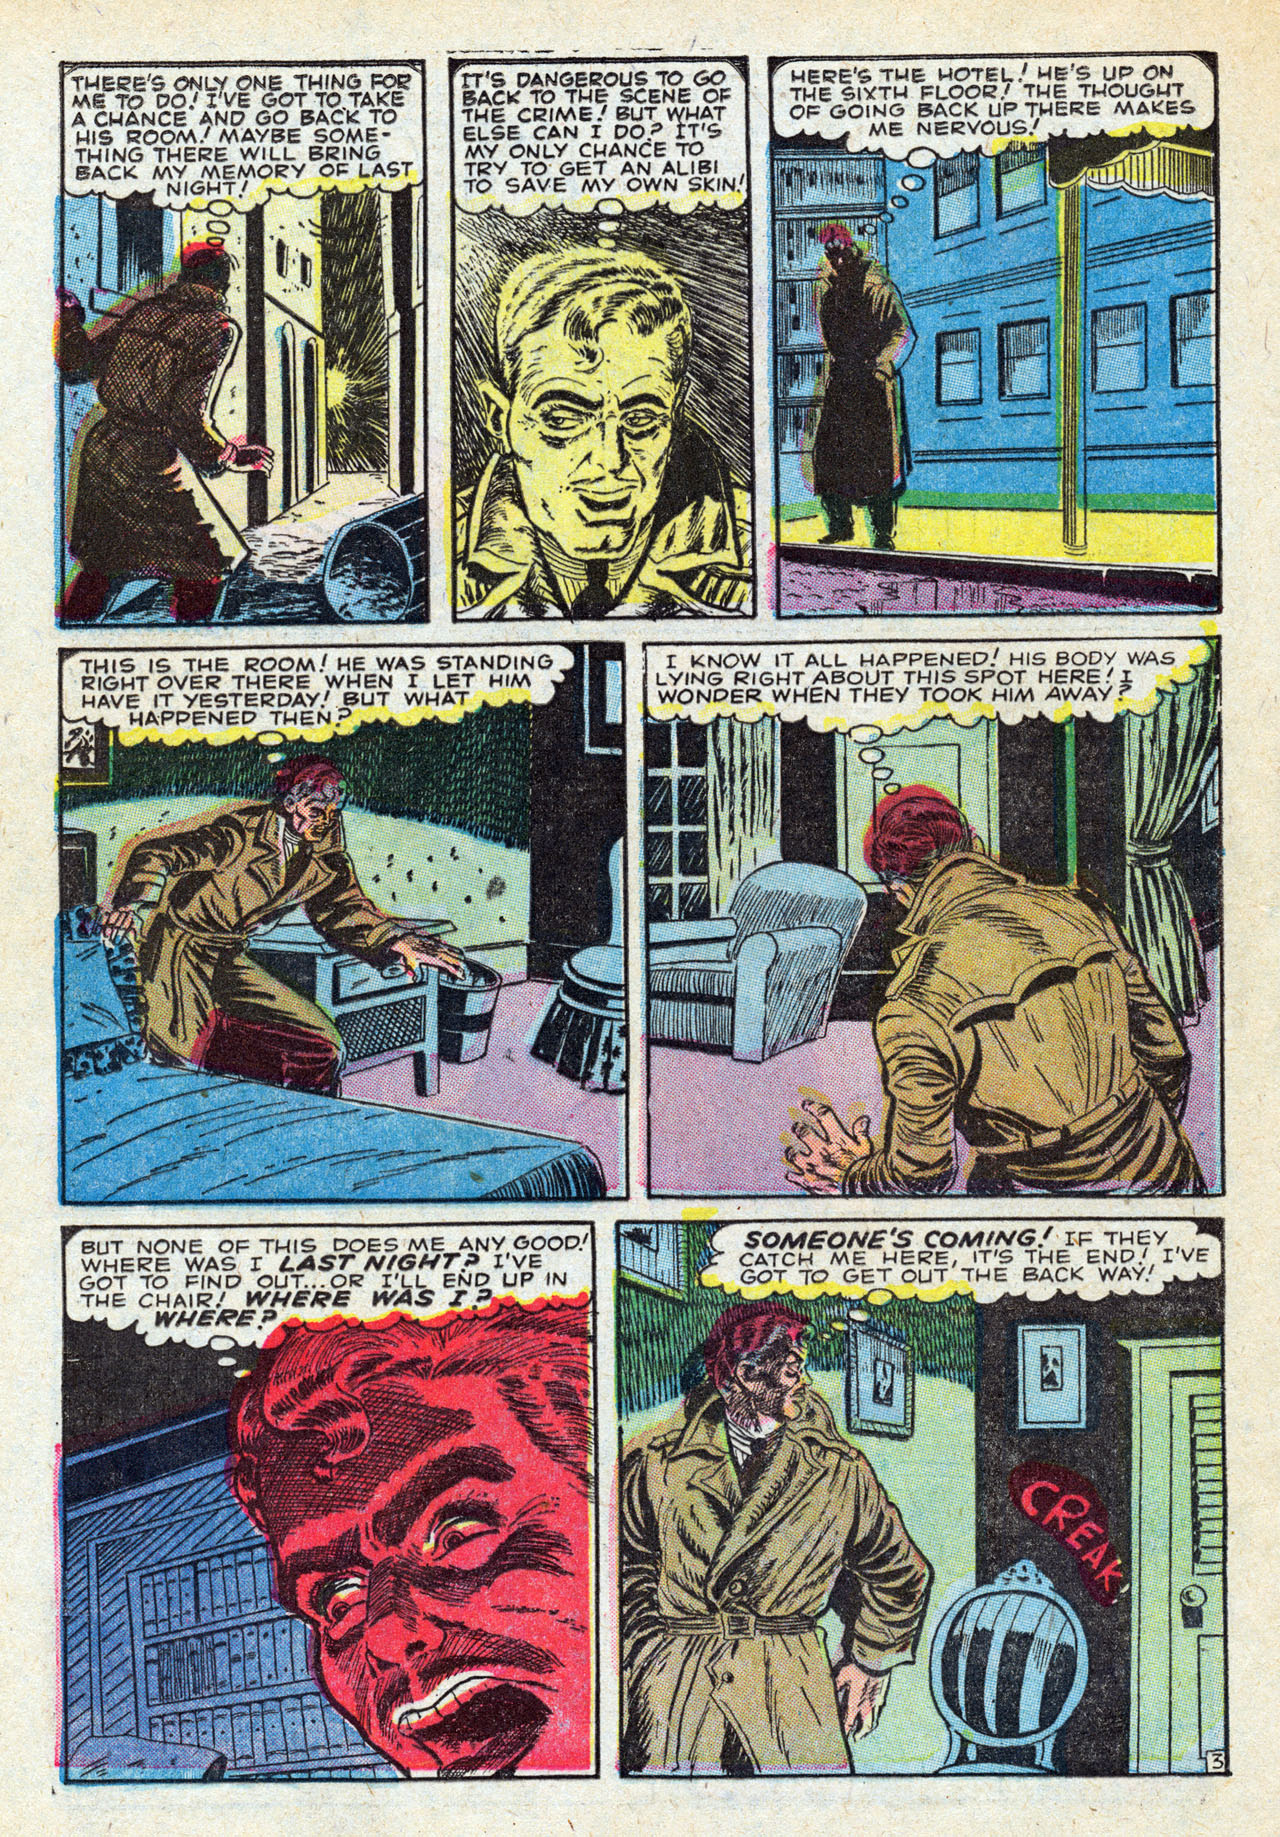 Marvel Tales (1949) 132 Page 23